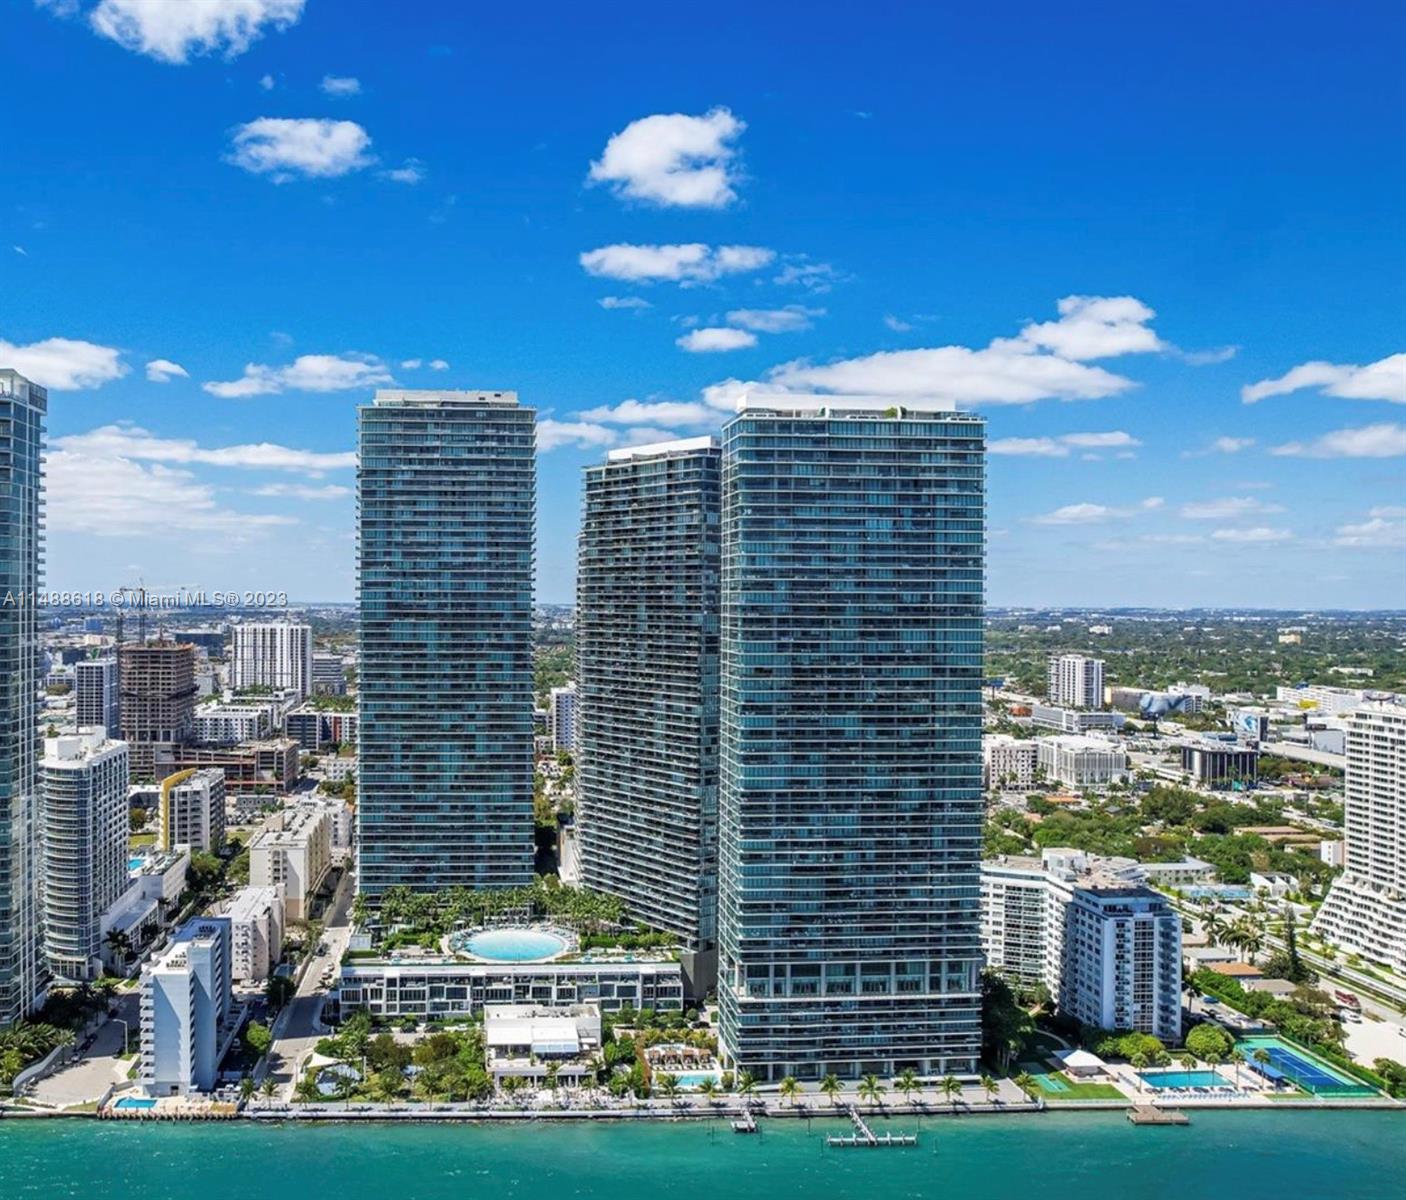 Best priced unit in building of this size!!! Welcome to Paraiso Bay, a symbol of opulent living in Miami. Where this flawless 2-bed, 2-full bath plus den residence remains untouched. Imagine walking into your unit looking to the majestic and exceptional views of the bay. Paraiso Bay provides a plethora of luxuries, from the dedicated elevators unveiling your private entrance to the boasting high-end details like SubZero/Bosch appliances, Italkraft cabinetry, waterviews from master room and incredible amenities, 100 feet diameter swimming pool, Spa, Modern Gym, exclusive children's amenities, Golf simulator, bowling alley, dog park, Wine room, Cigar Lounge, Concierge and the pièce de résistance, Amara—a sophisticated dining experience by Michael Schwartz offering bayfront cuisine.